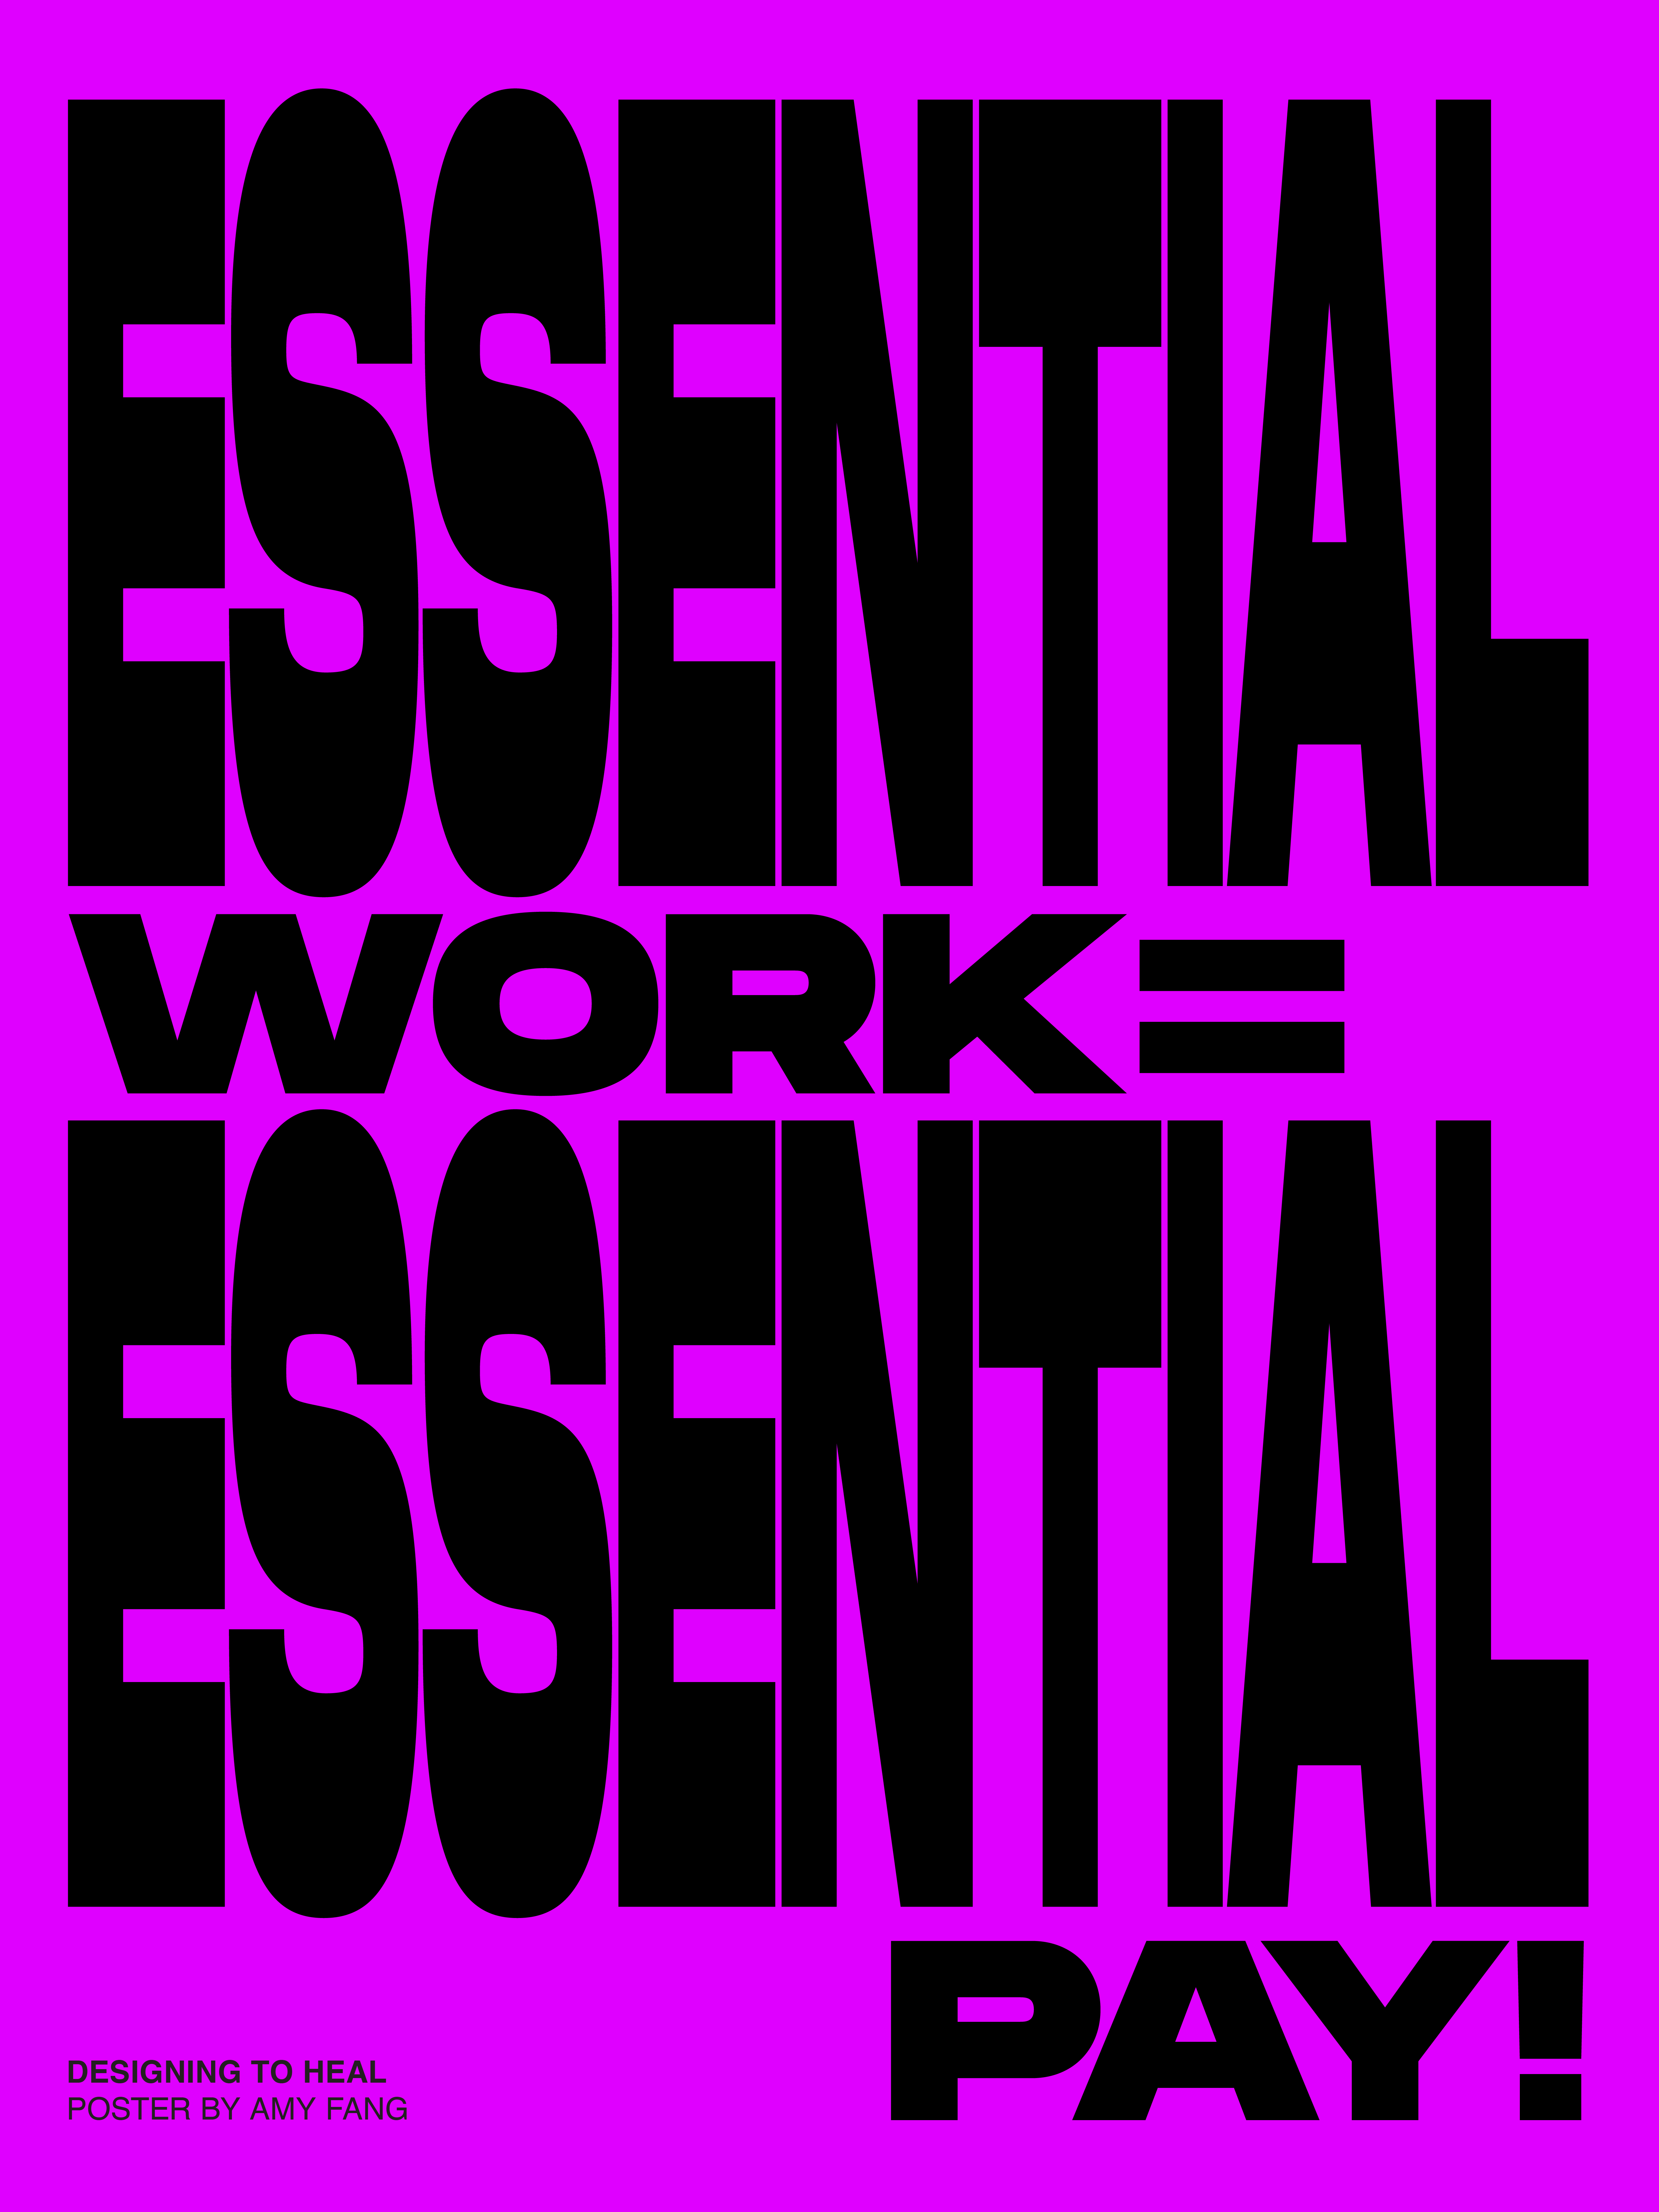 type-based poster of horizontal black text saying essential work equals essential pay against a purple background